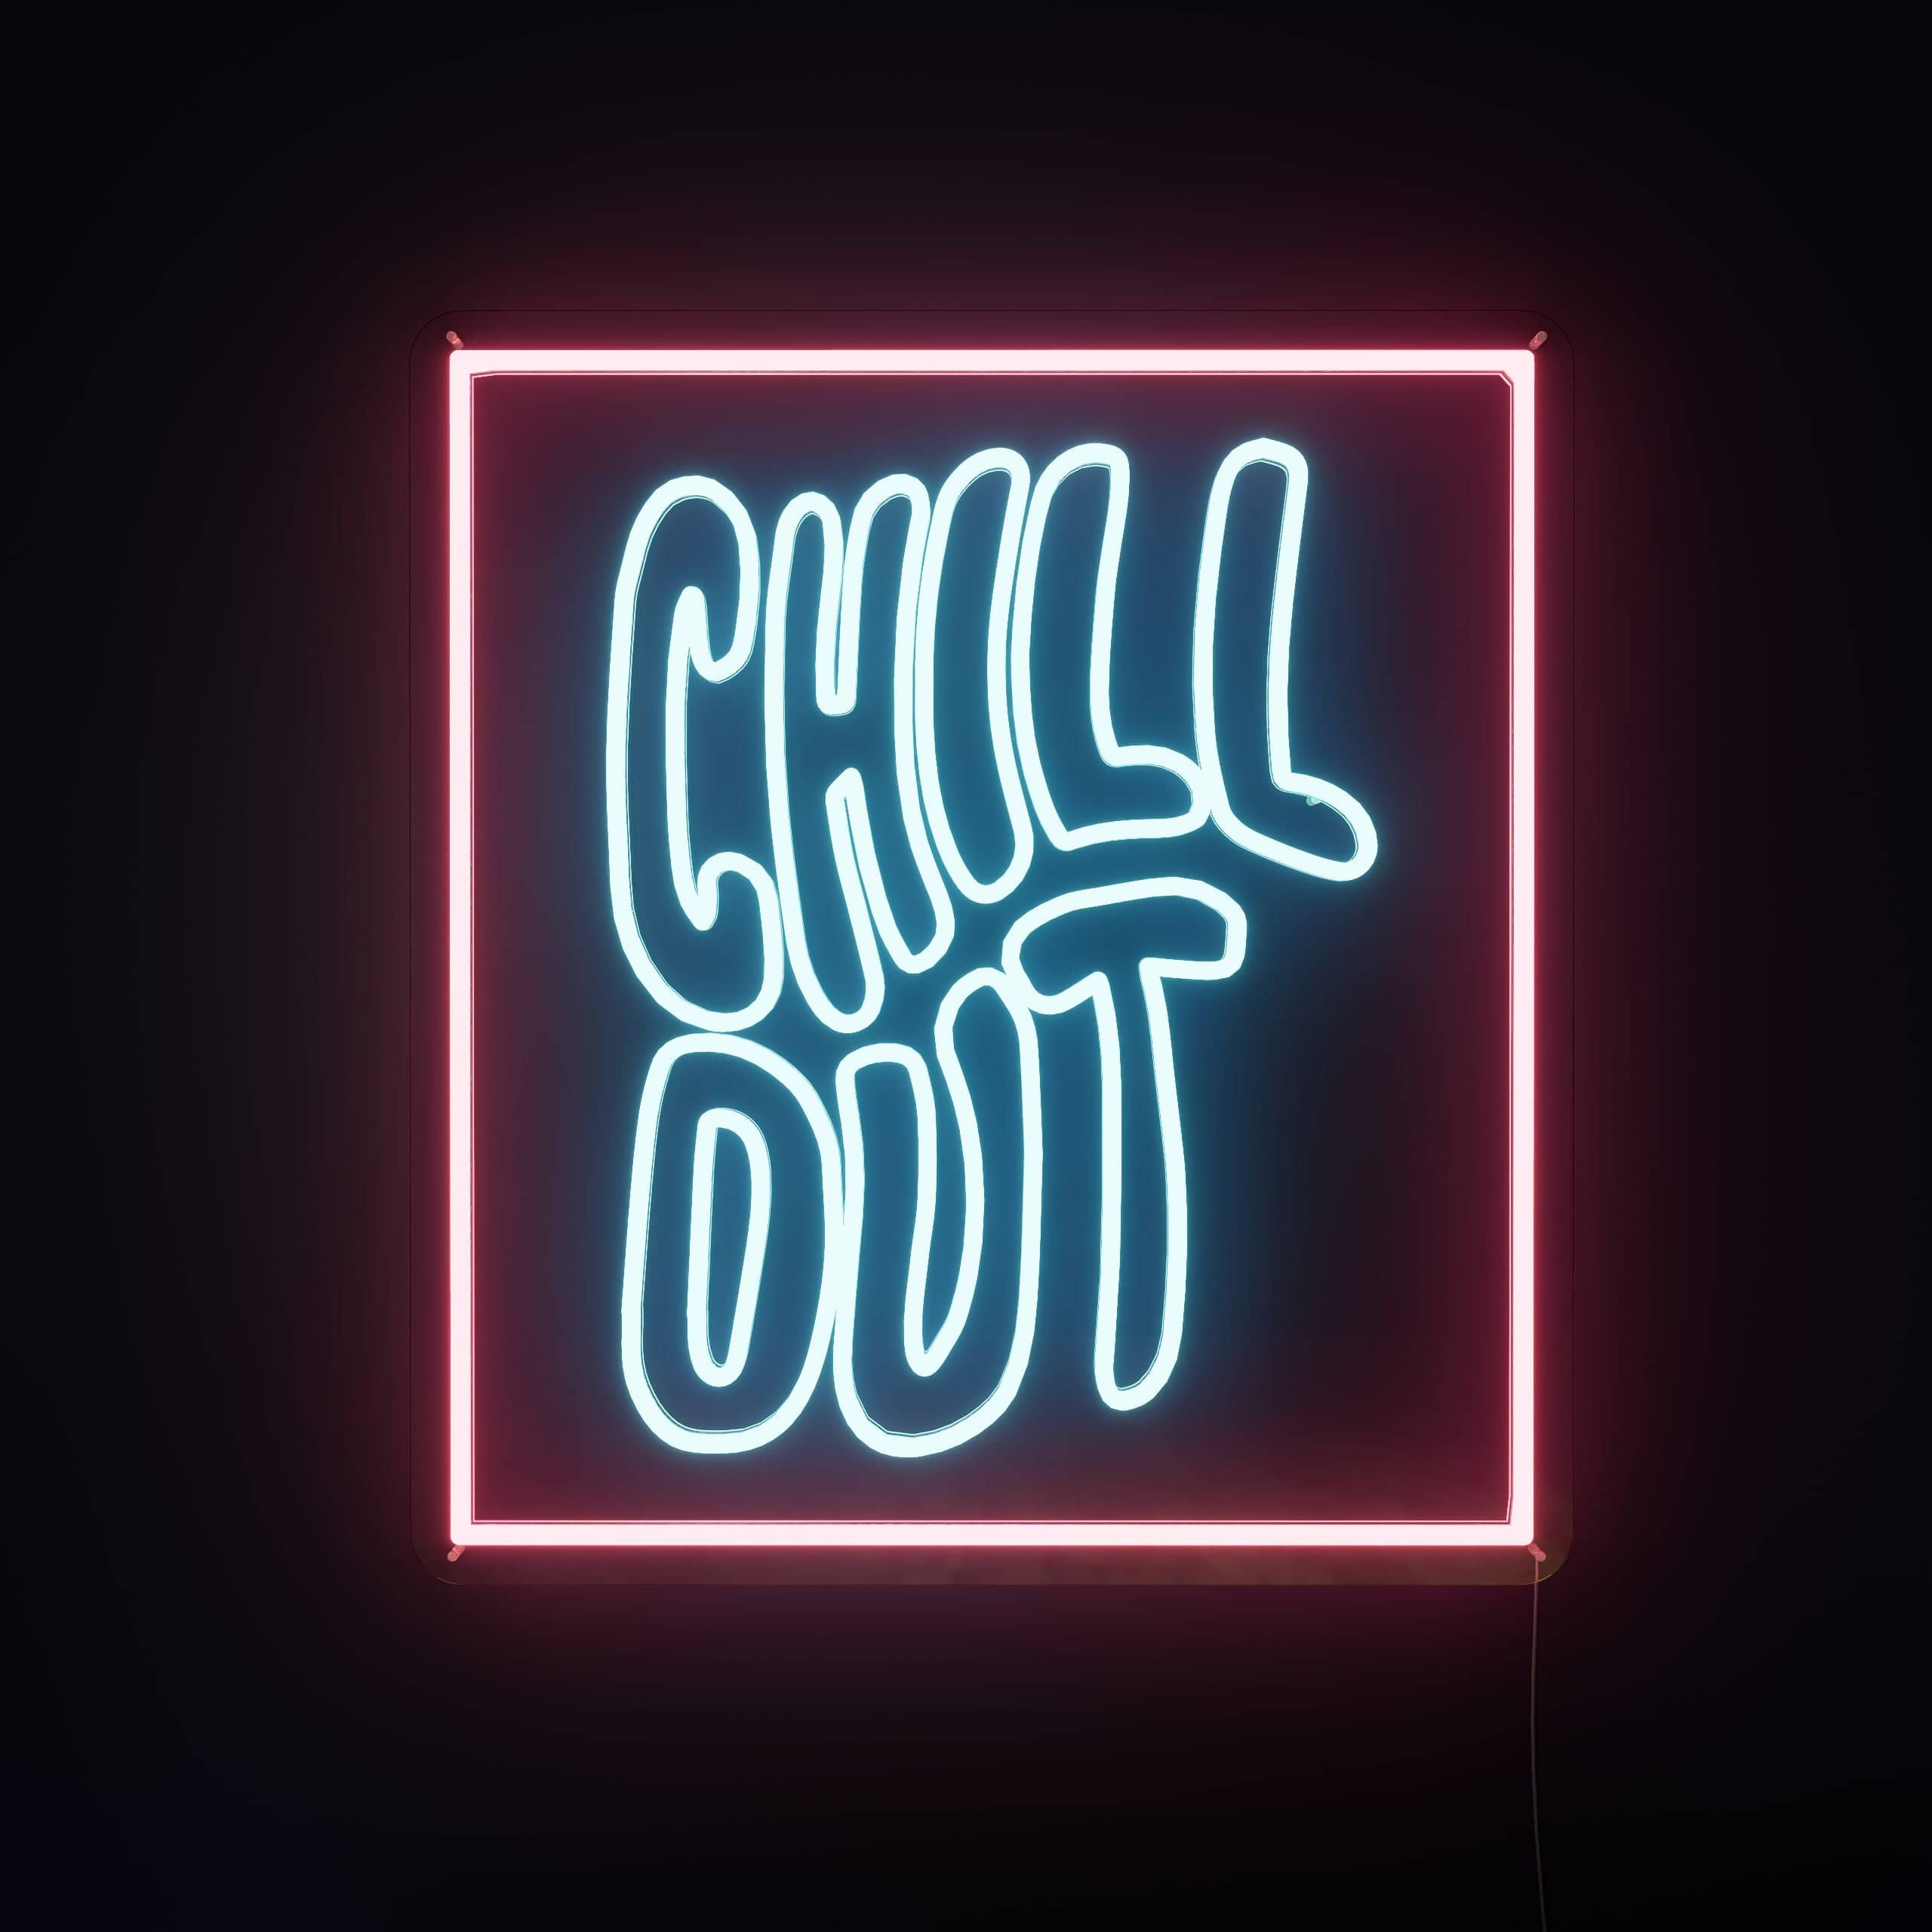 relax-and-unwind-neon-sign-lite